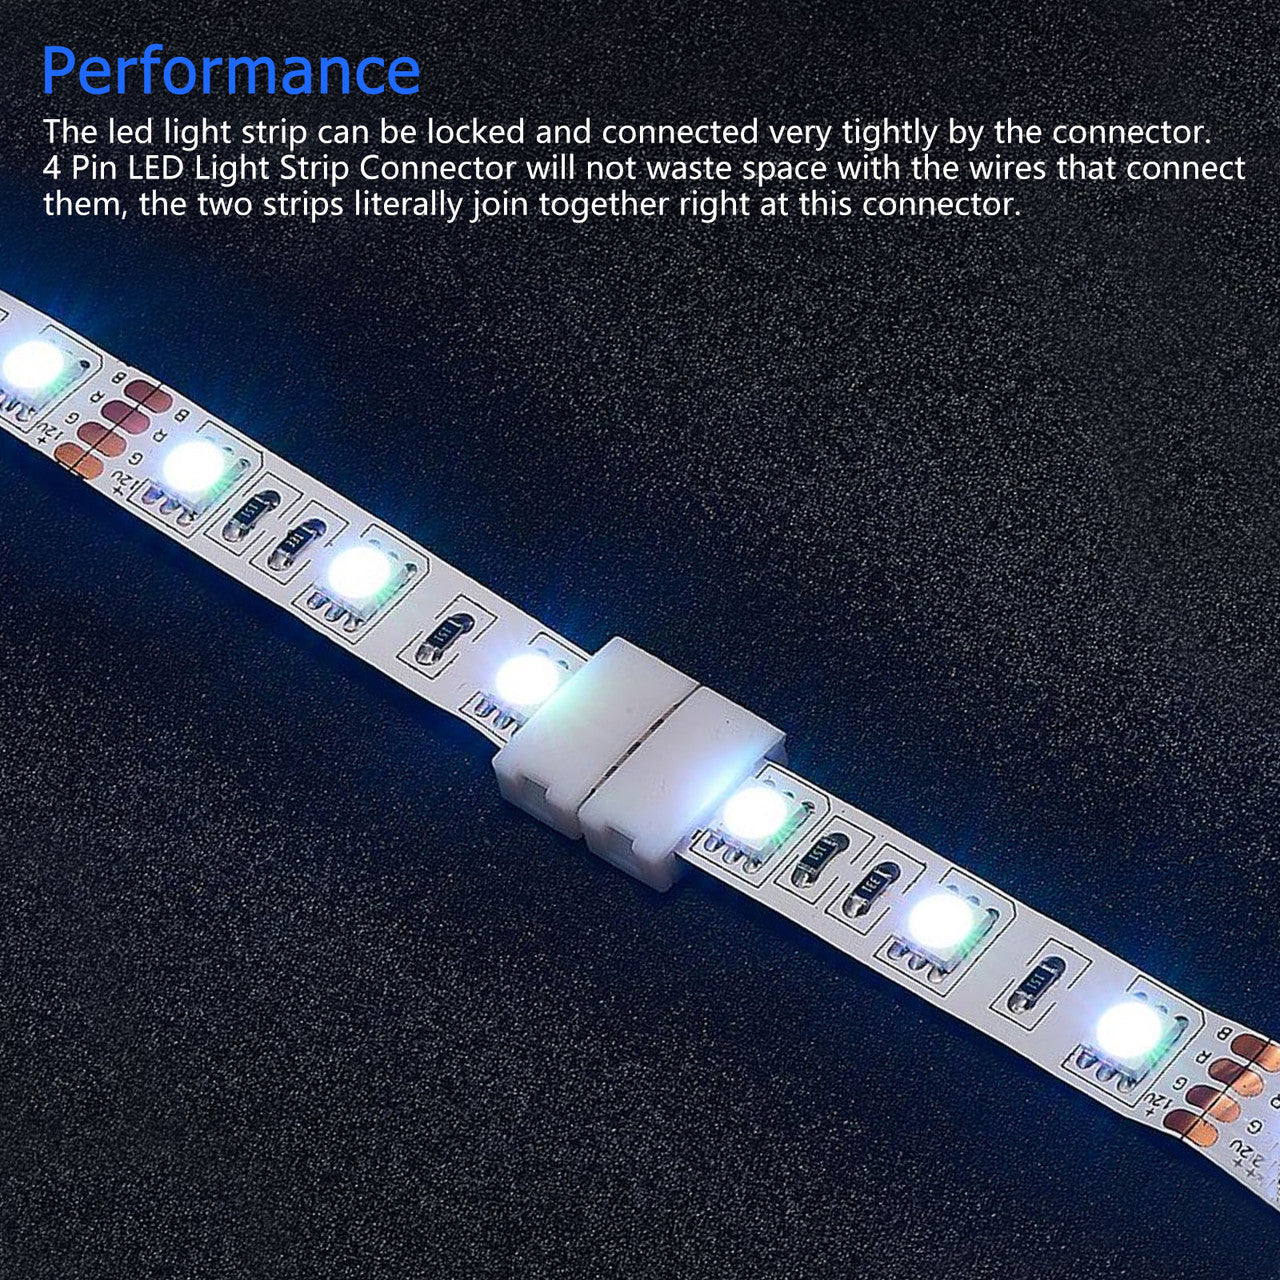 20Pcs Led Strip Light Connectors, 4 Pins Light Strips Solderless Connectors Clip Fireproof Material for 10mm SMD5050 RGB LED Flexible Strip Lights Strip to Strip